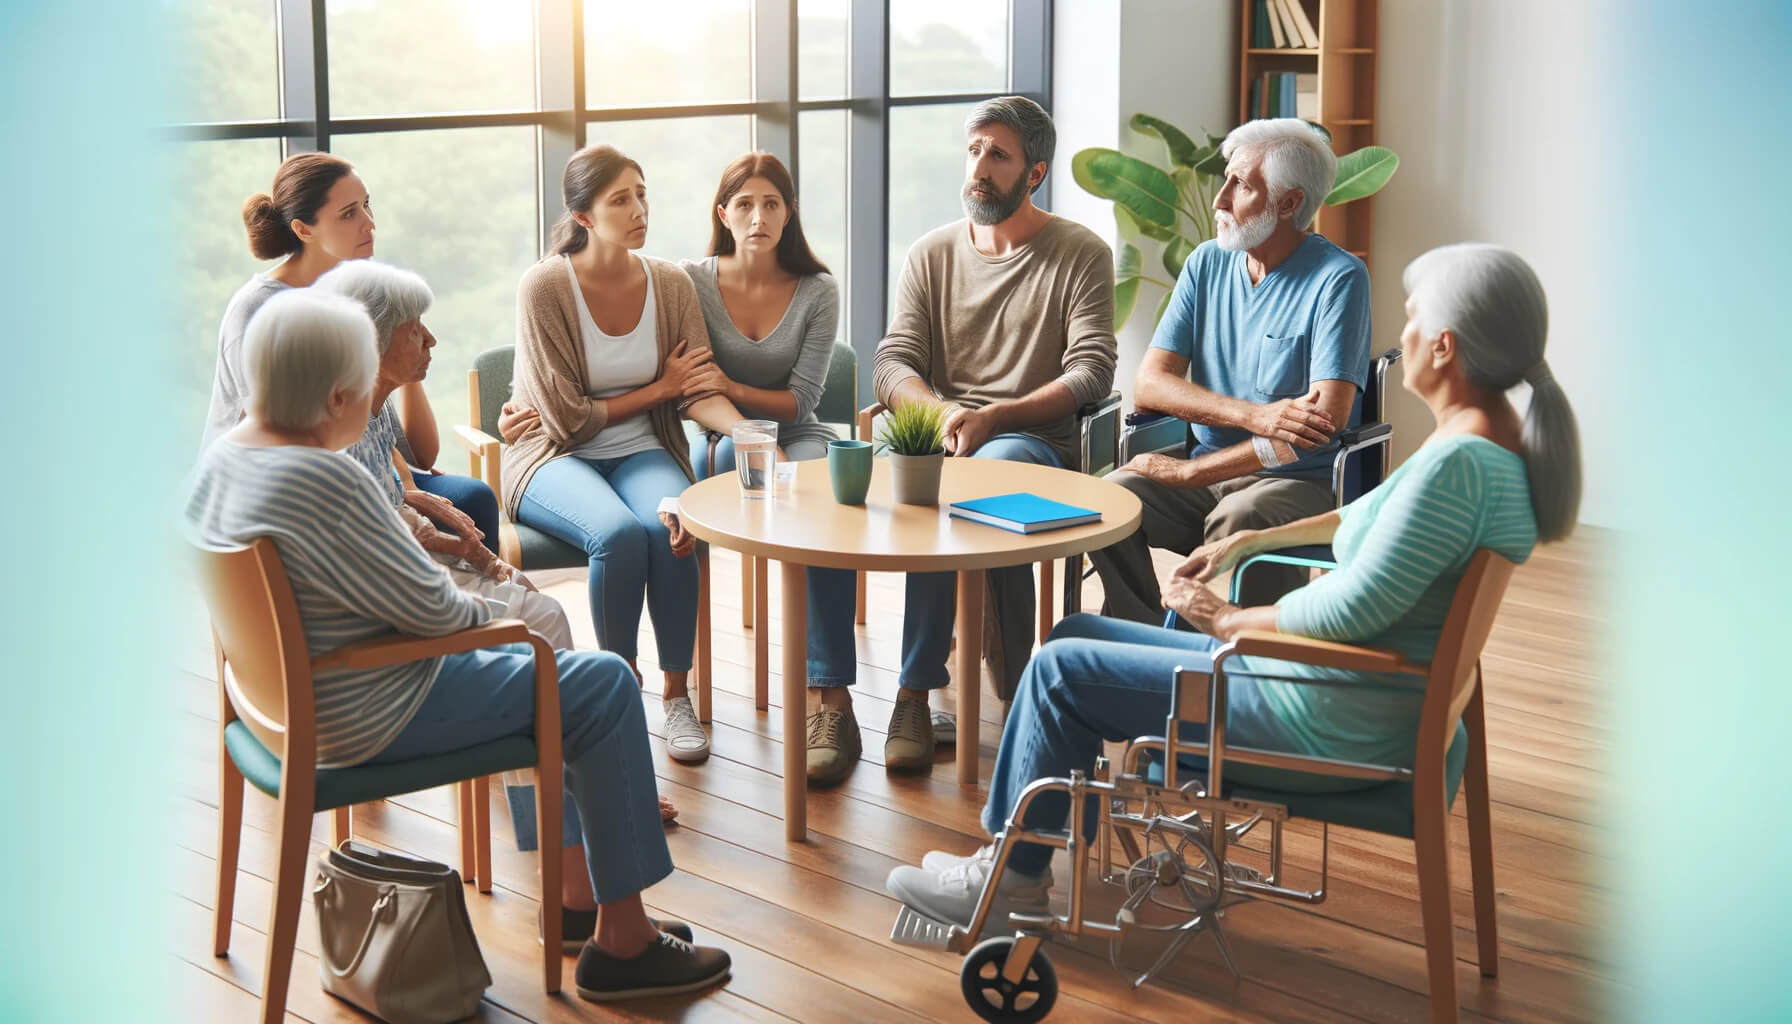 Patient support groups offer valuable insights and a sense of community